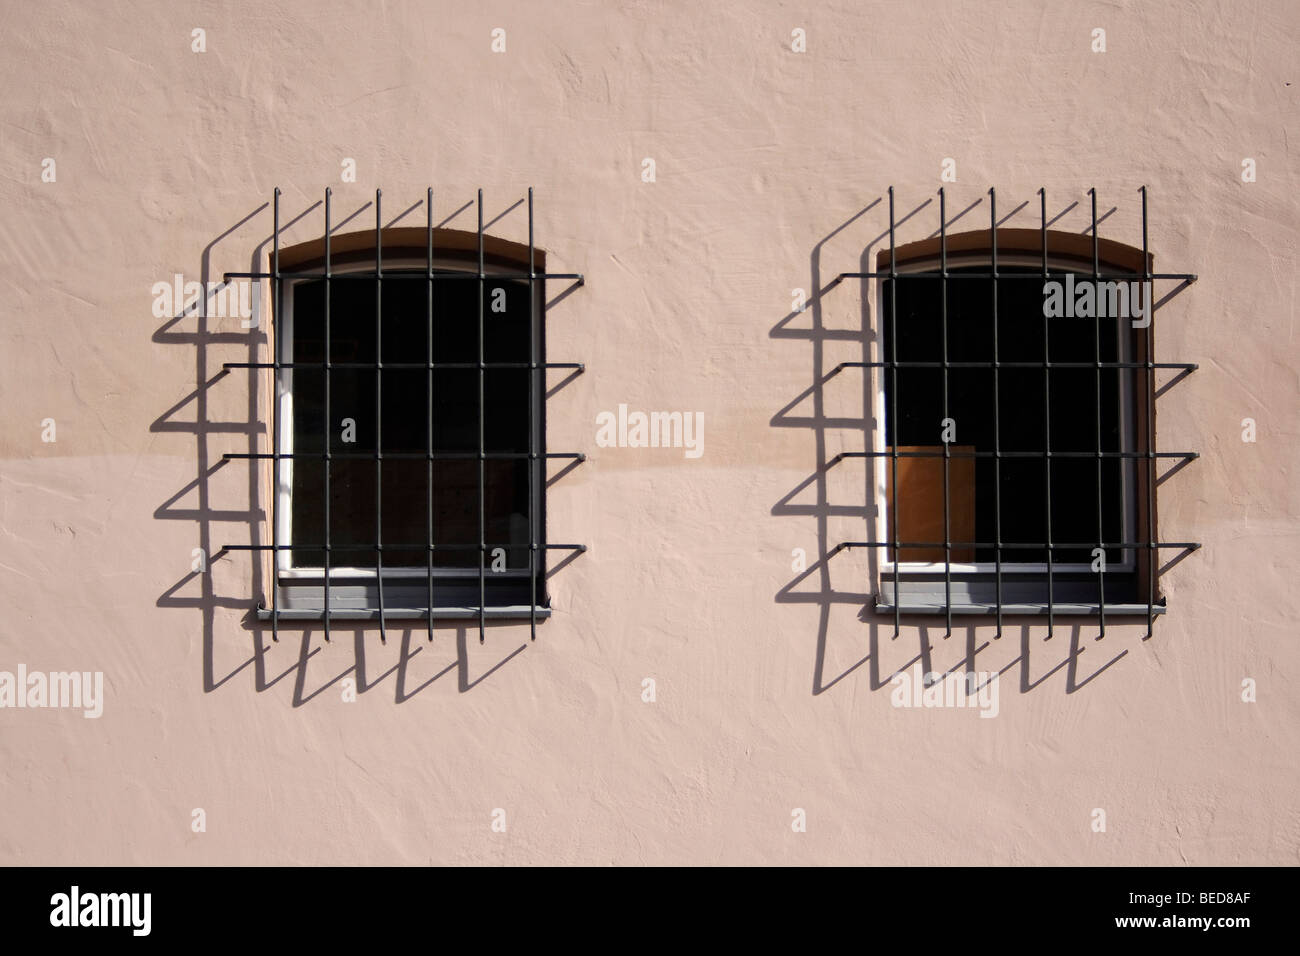 A pair of windows with grilles and shadows on a house front Stock Photo